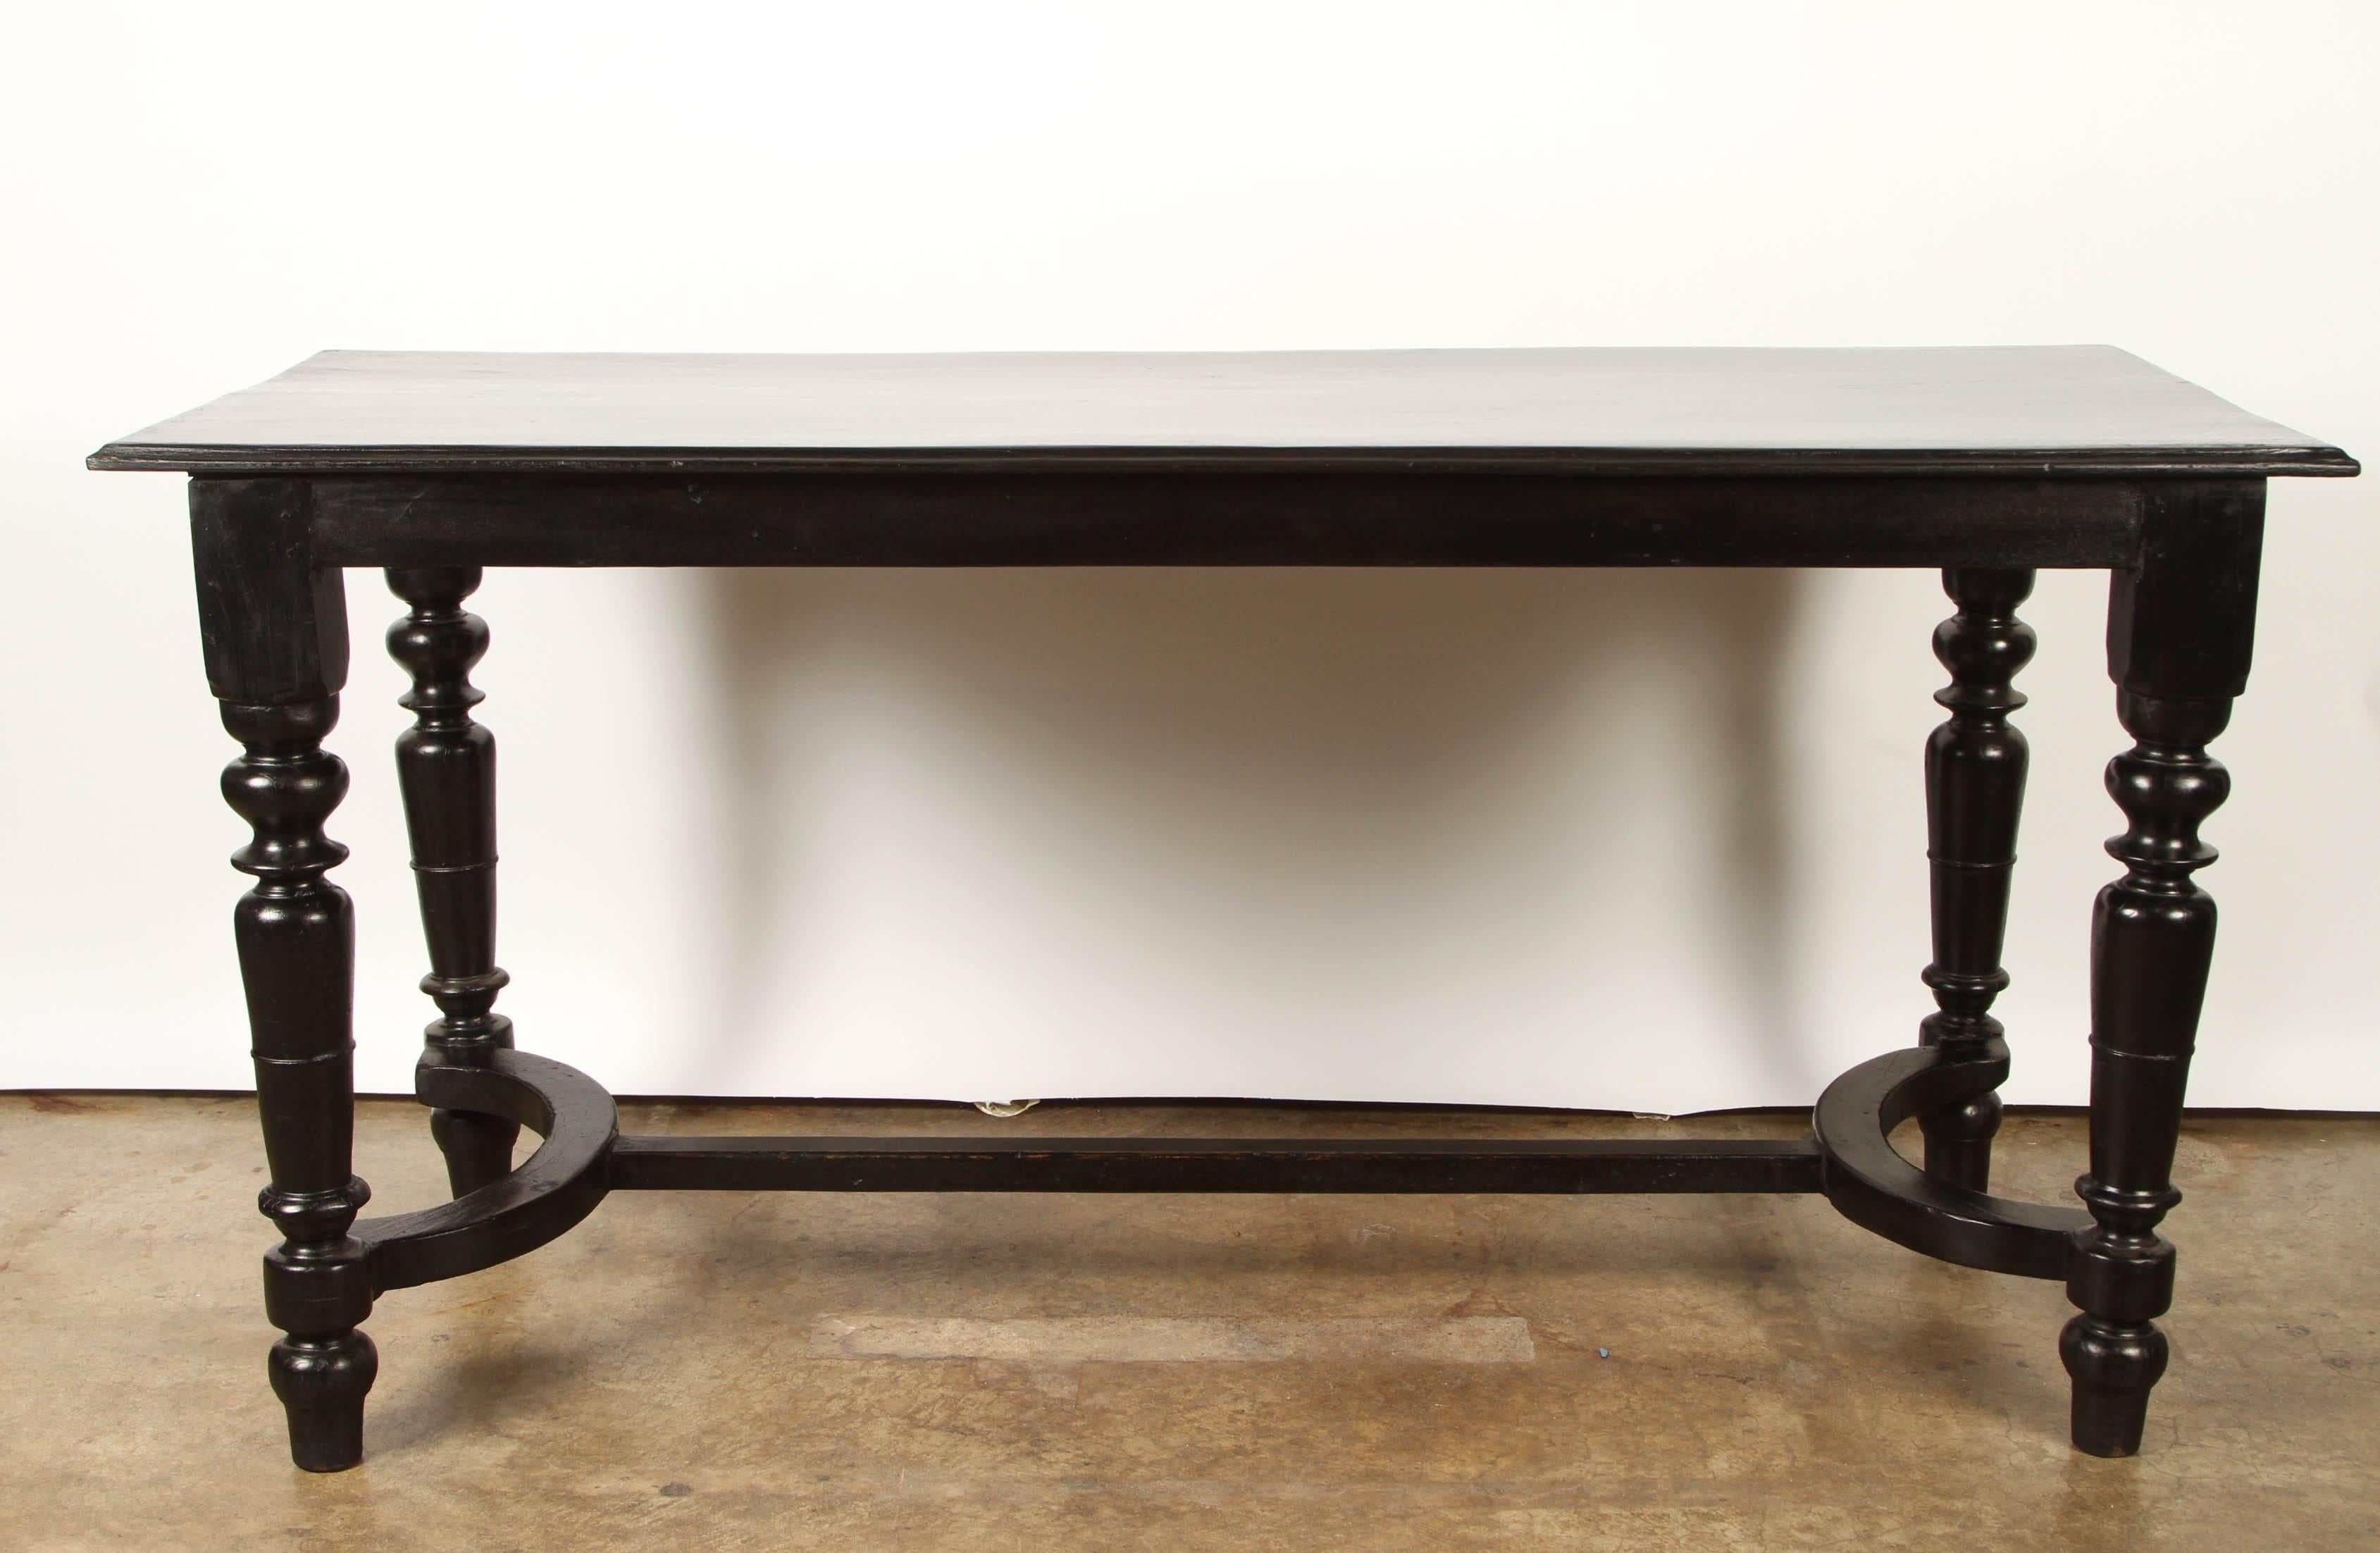 Made for the local French market, this Vietnamese console table is made from solid indigenous rosewood. The top of this rosewood table is supported by four turned legs and a central stretcher.